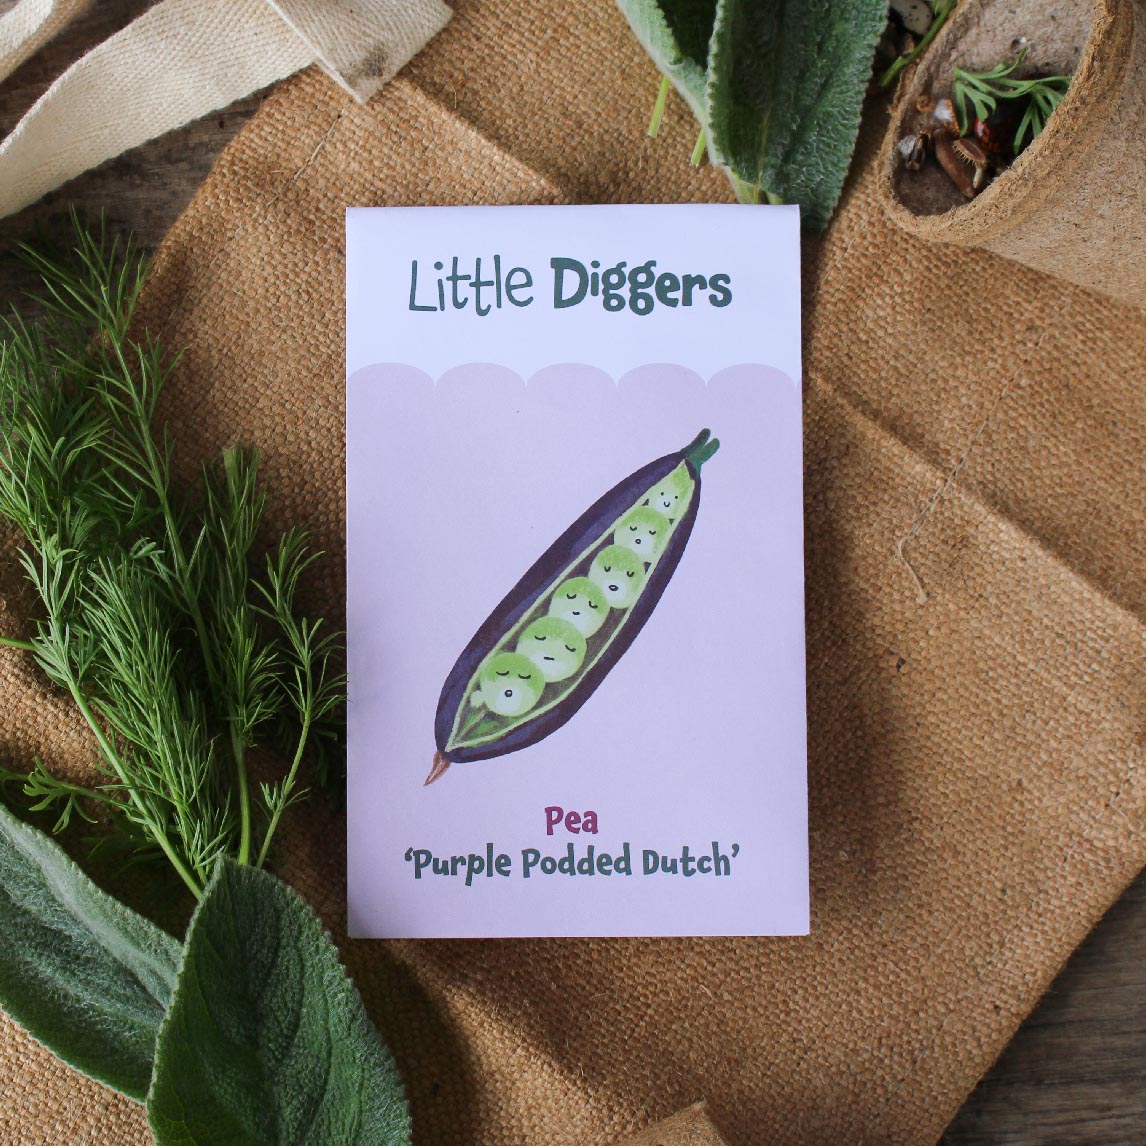 Little Diggers Pea Purple Podded